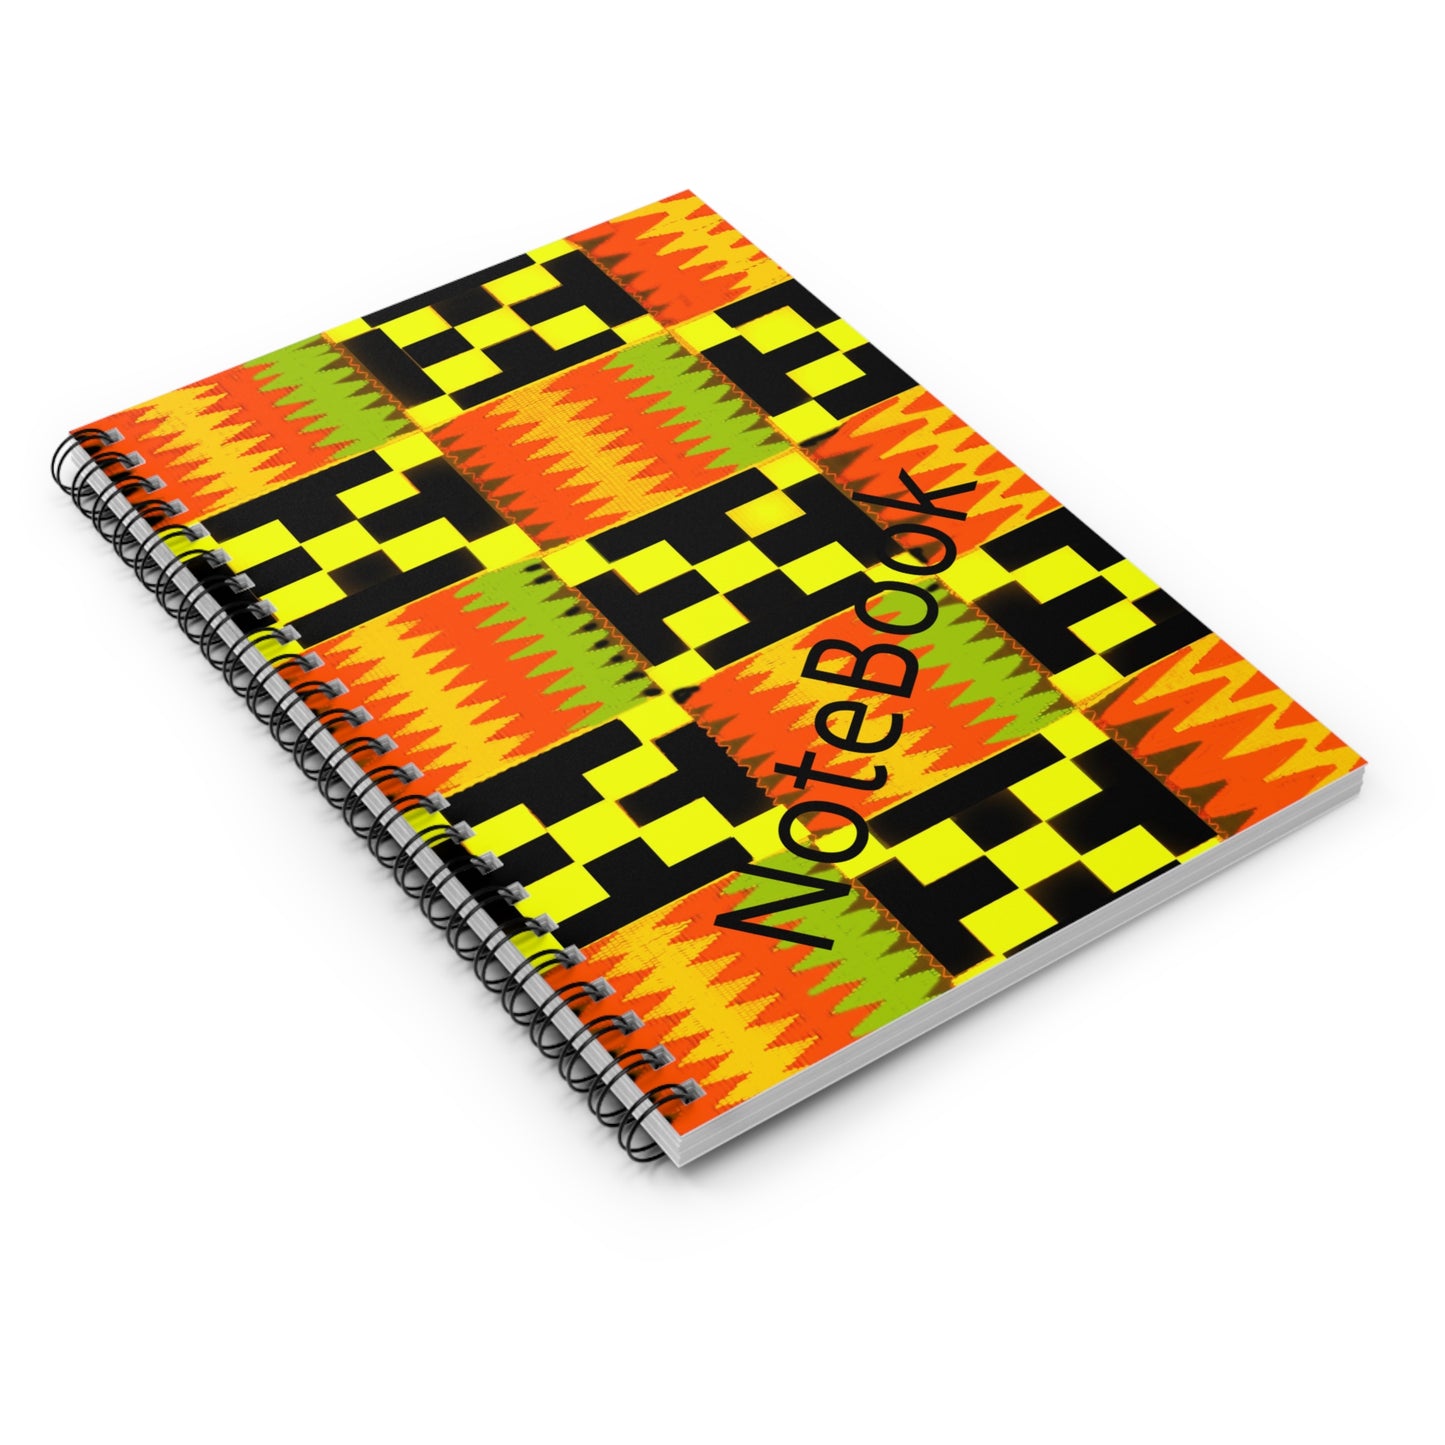 Notebooks with Style: Kente Cloth Design, Practical & Bold